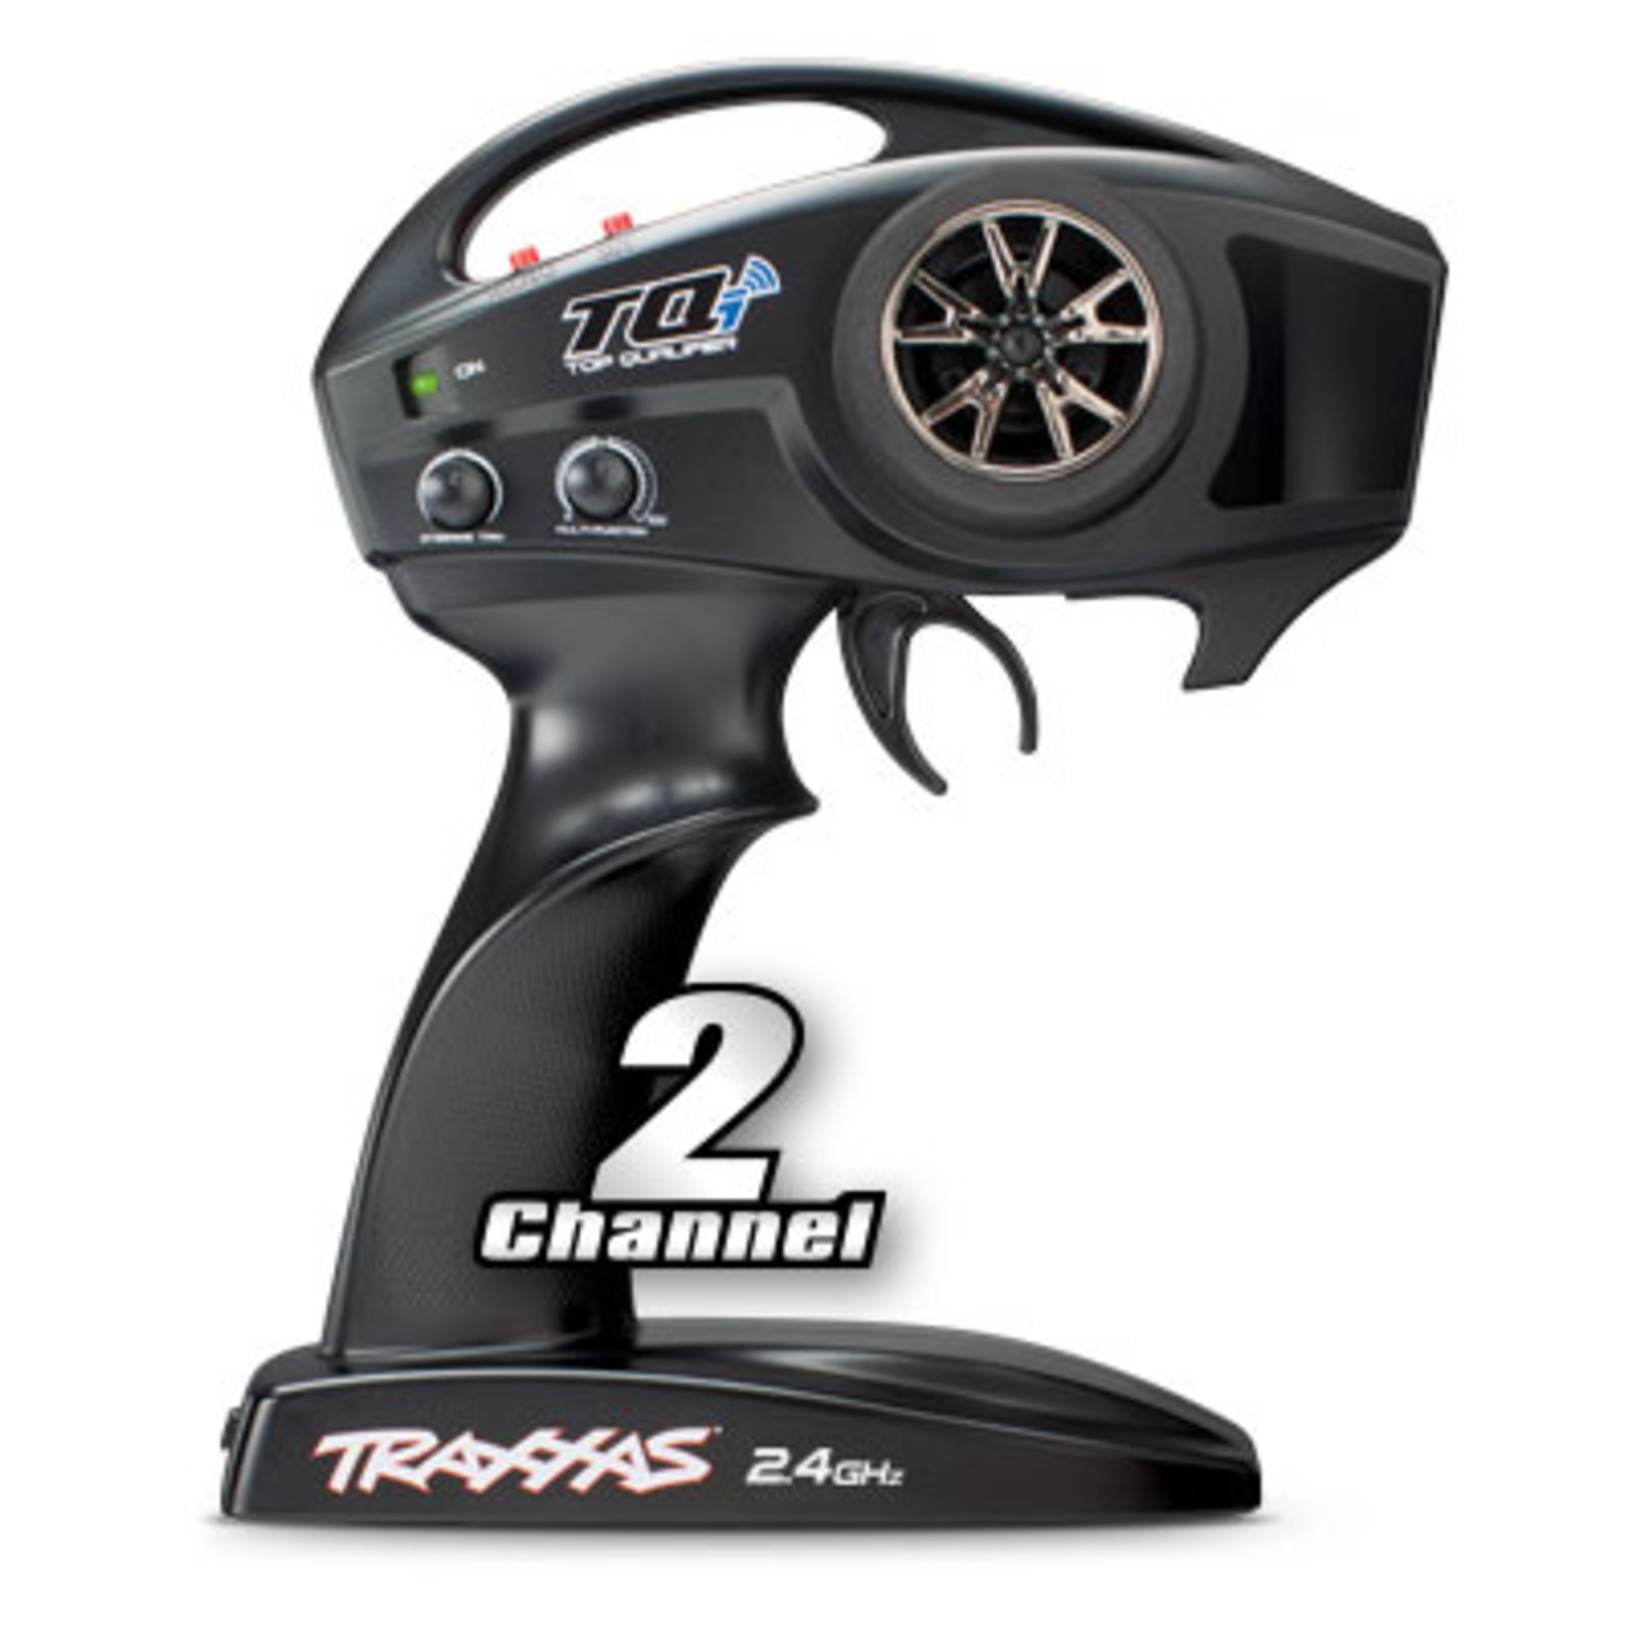 Traxxas 6509R  TQi 2.4 GHz High Output radio system, 2-channel, Traxxas Link™ enabled, TSM (2-ch transmitter, 5-ch micro receiver)